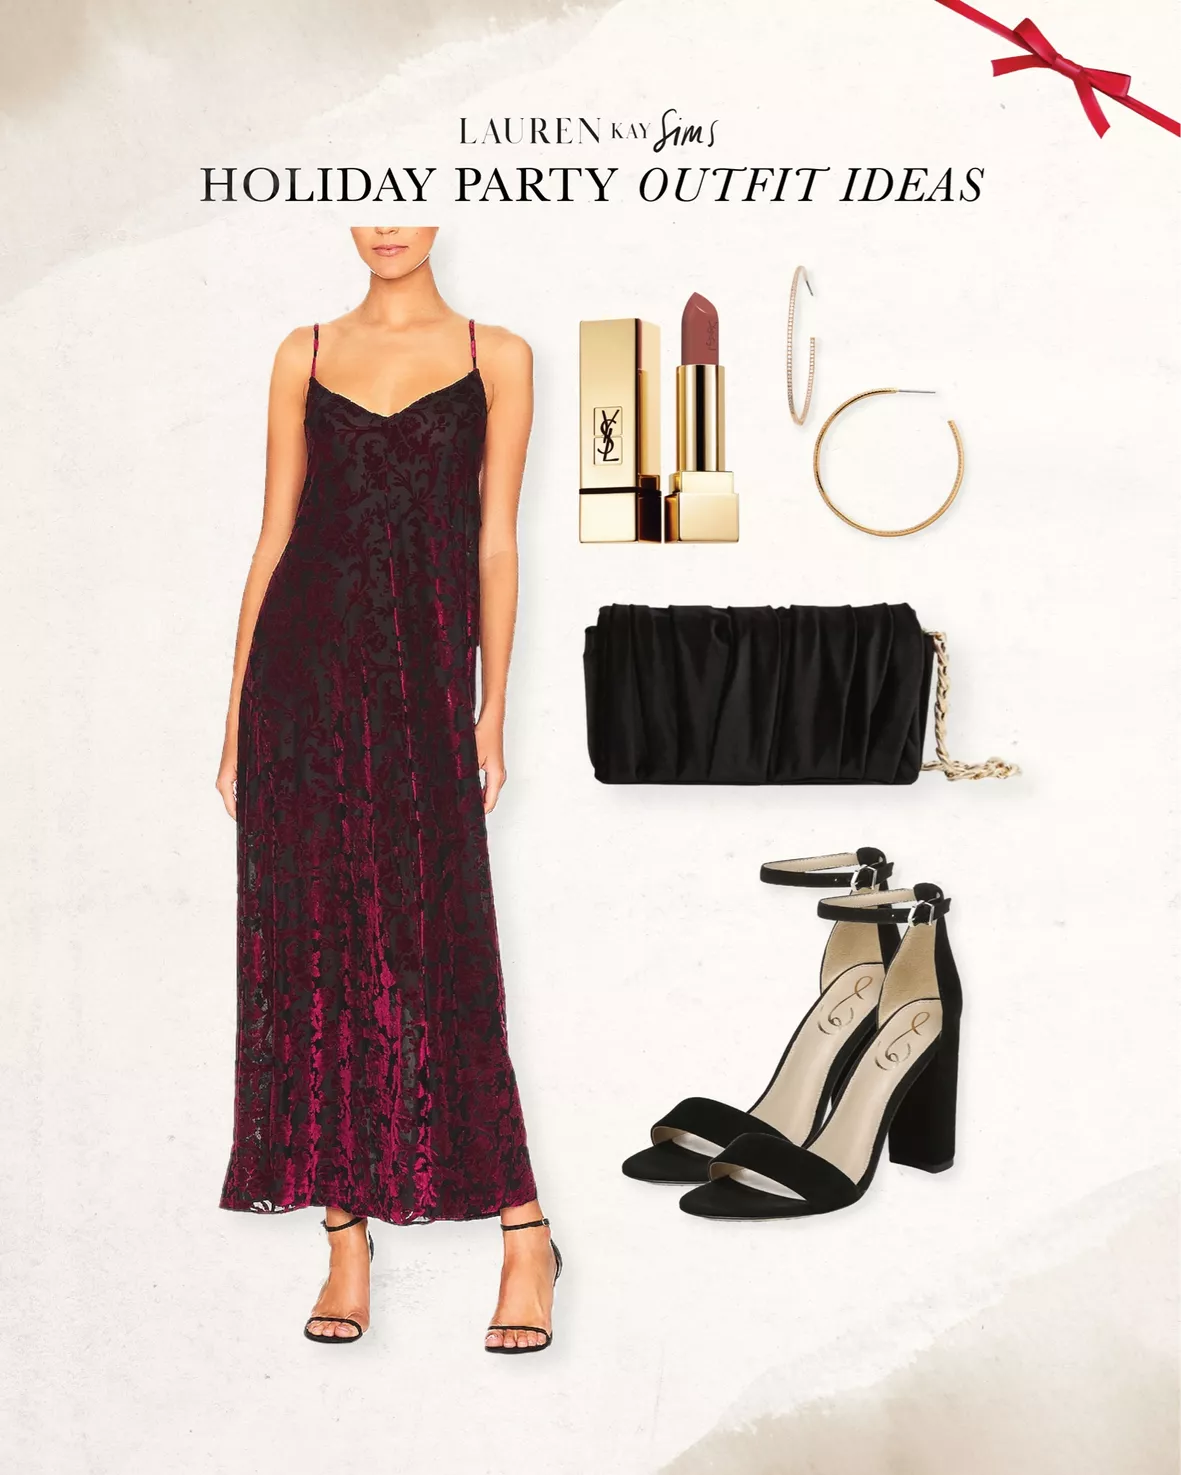 holiday party outfit inspo - Lauren Kay Sims